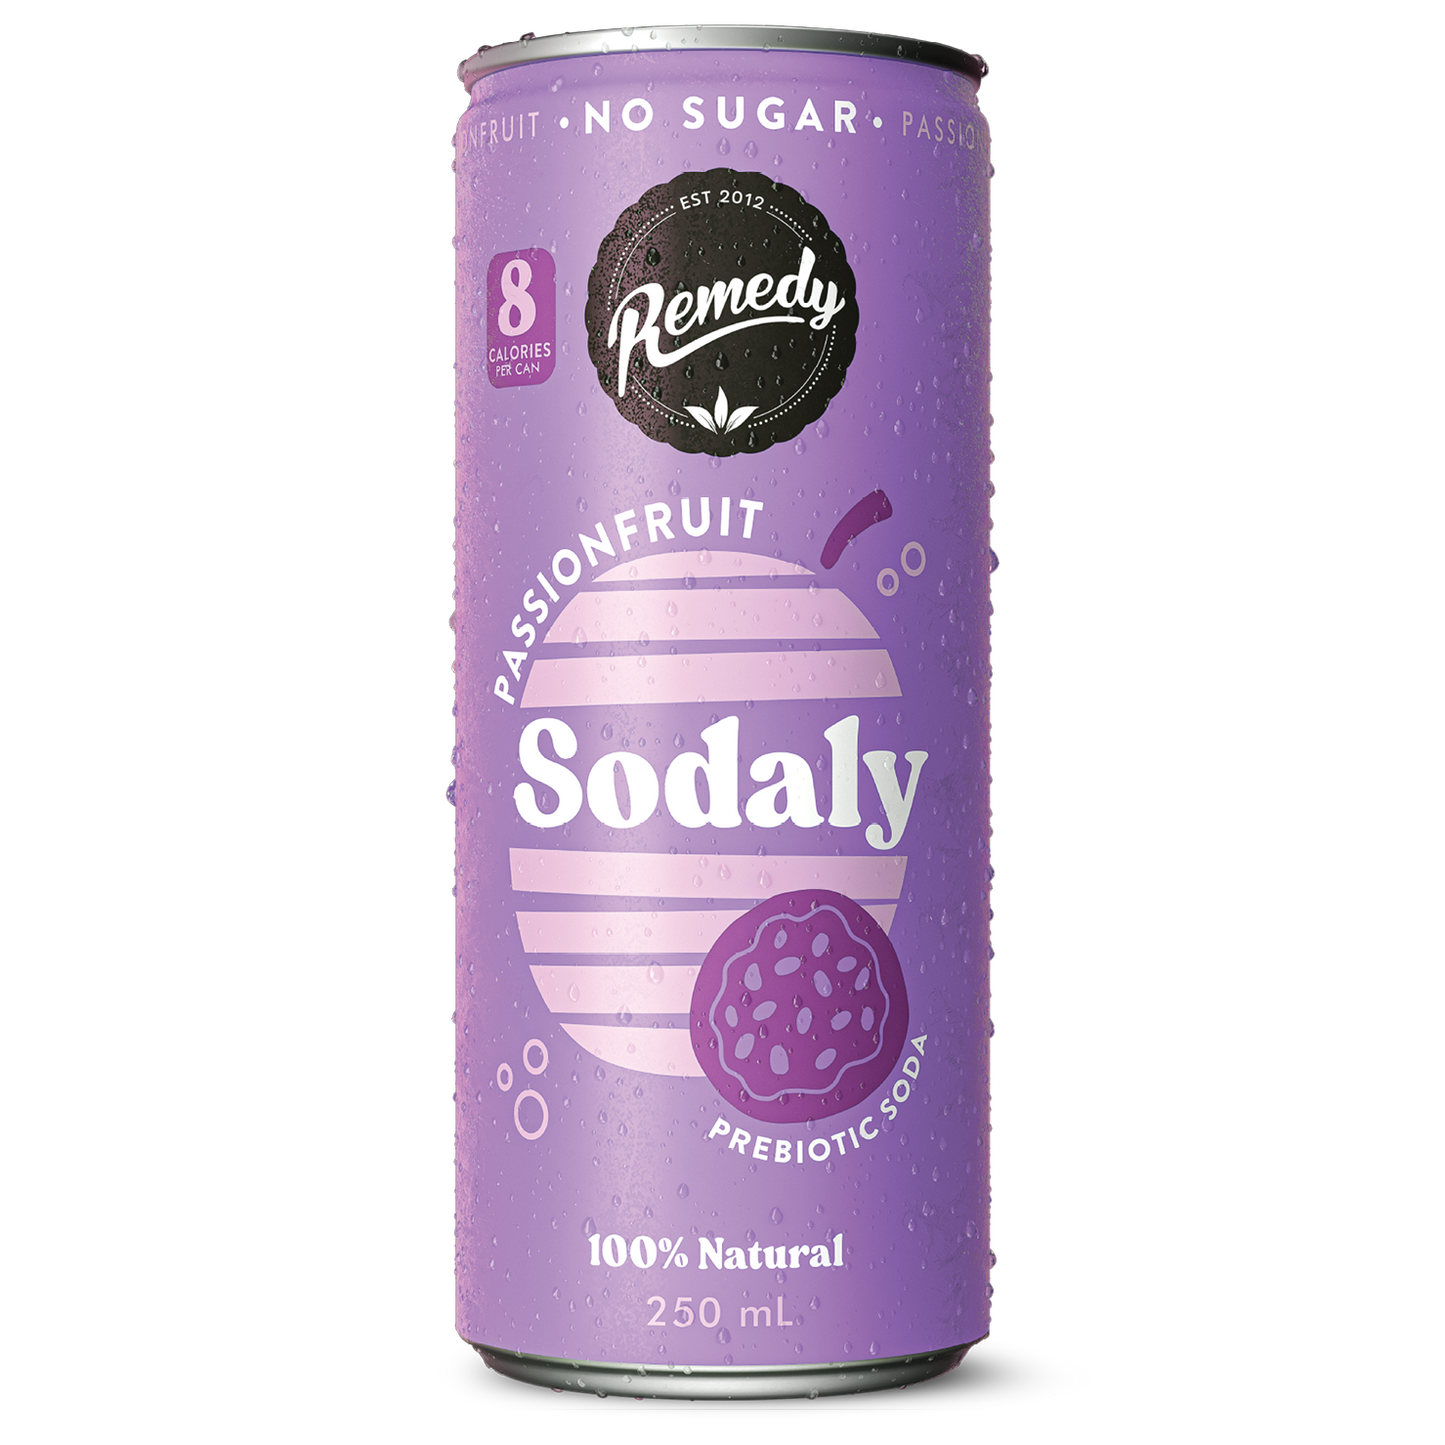 Remedy Sodaly Passionfruit